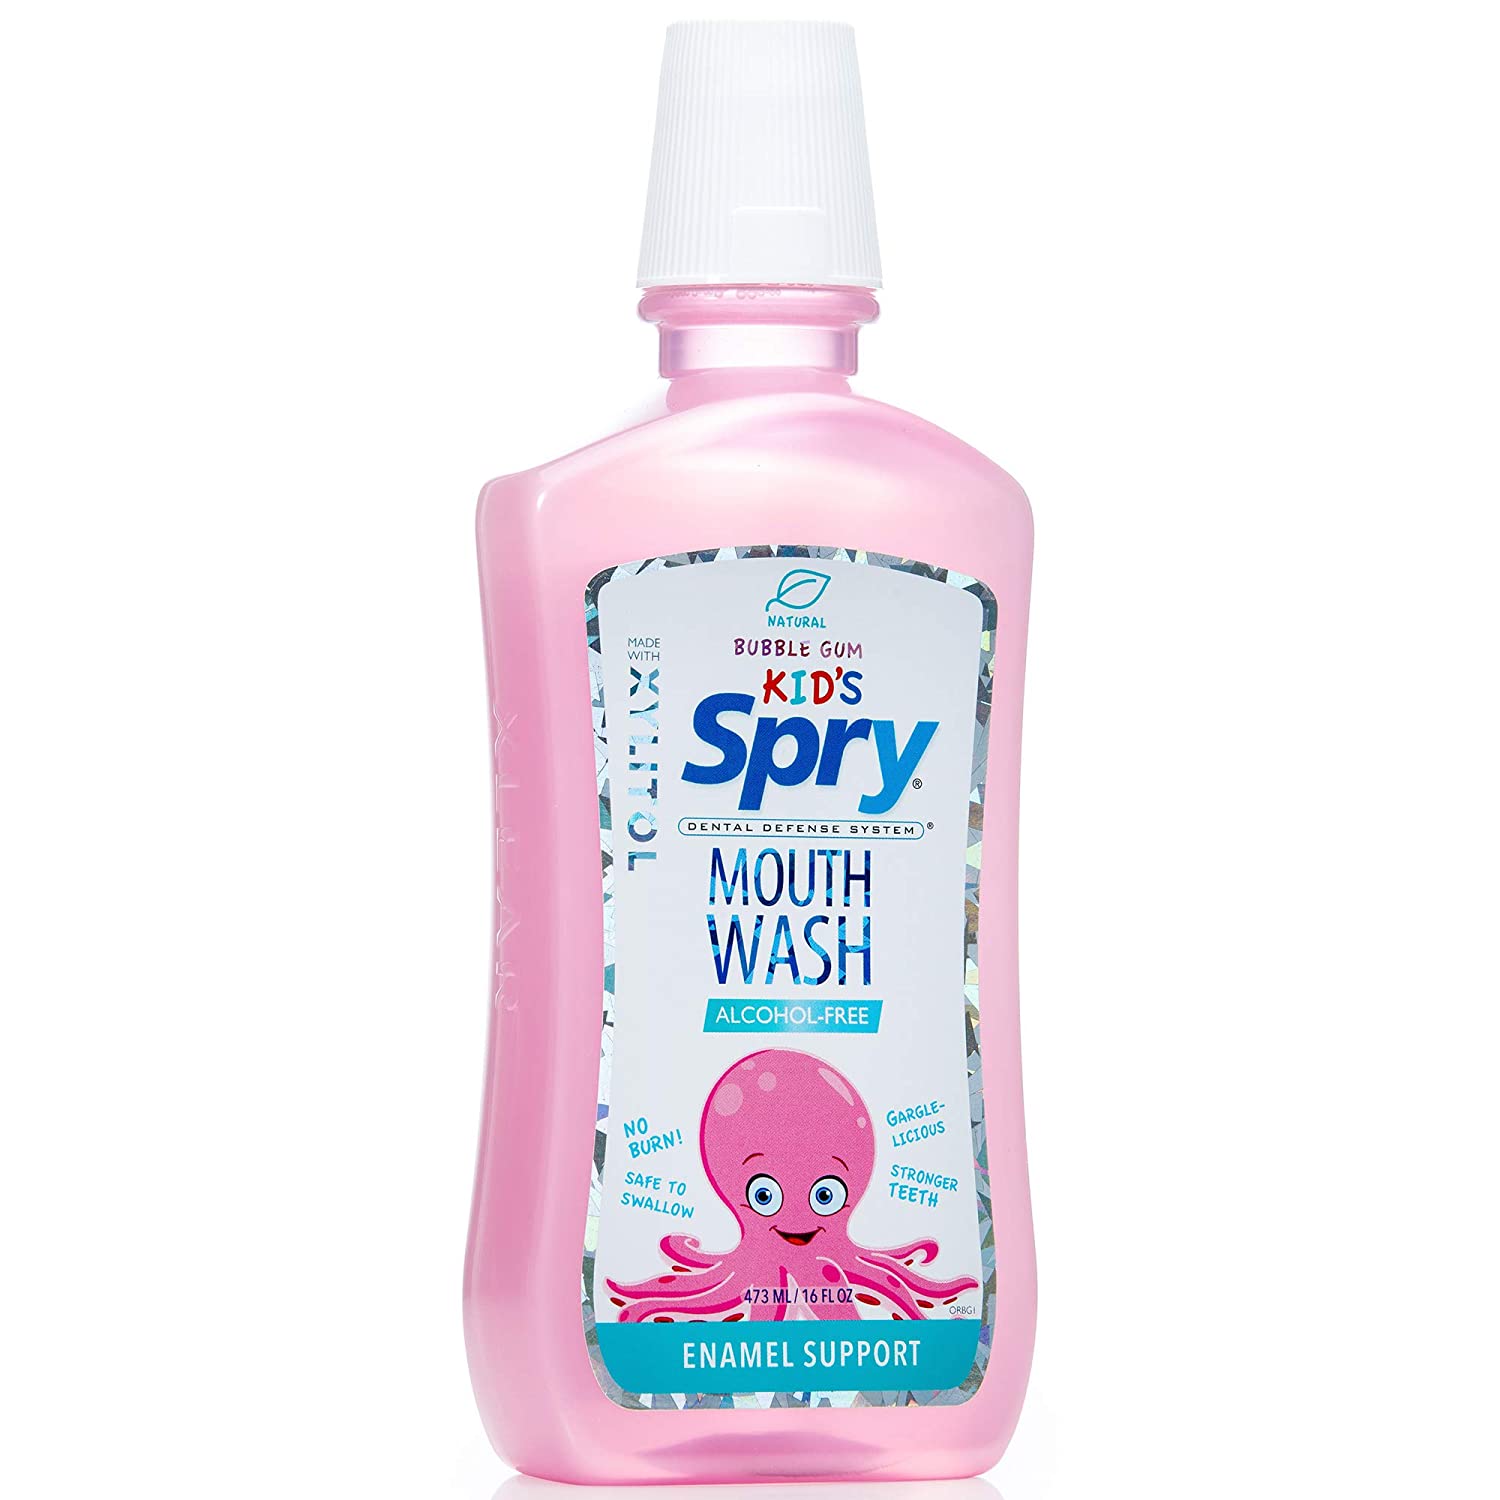 Spry Kids Mouthwash, Xylitol Mouthwash Alcohol Free with Enamel Support, Natural Bubble Gum